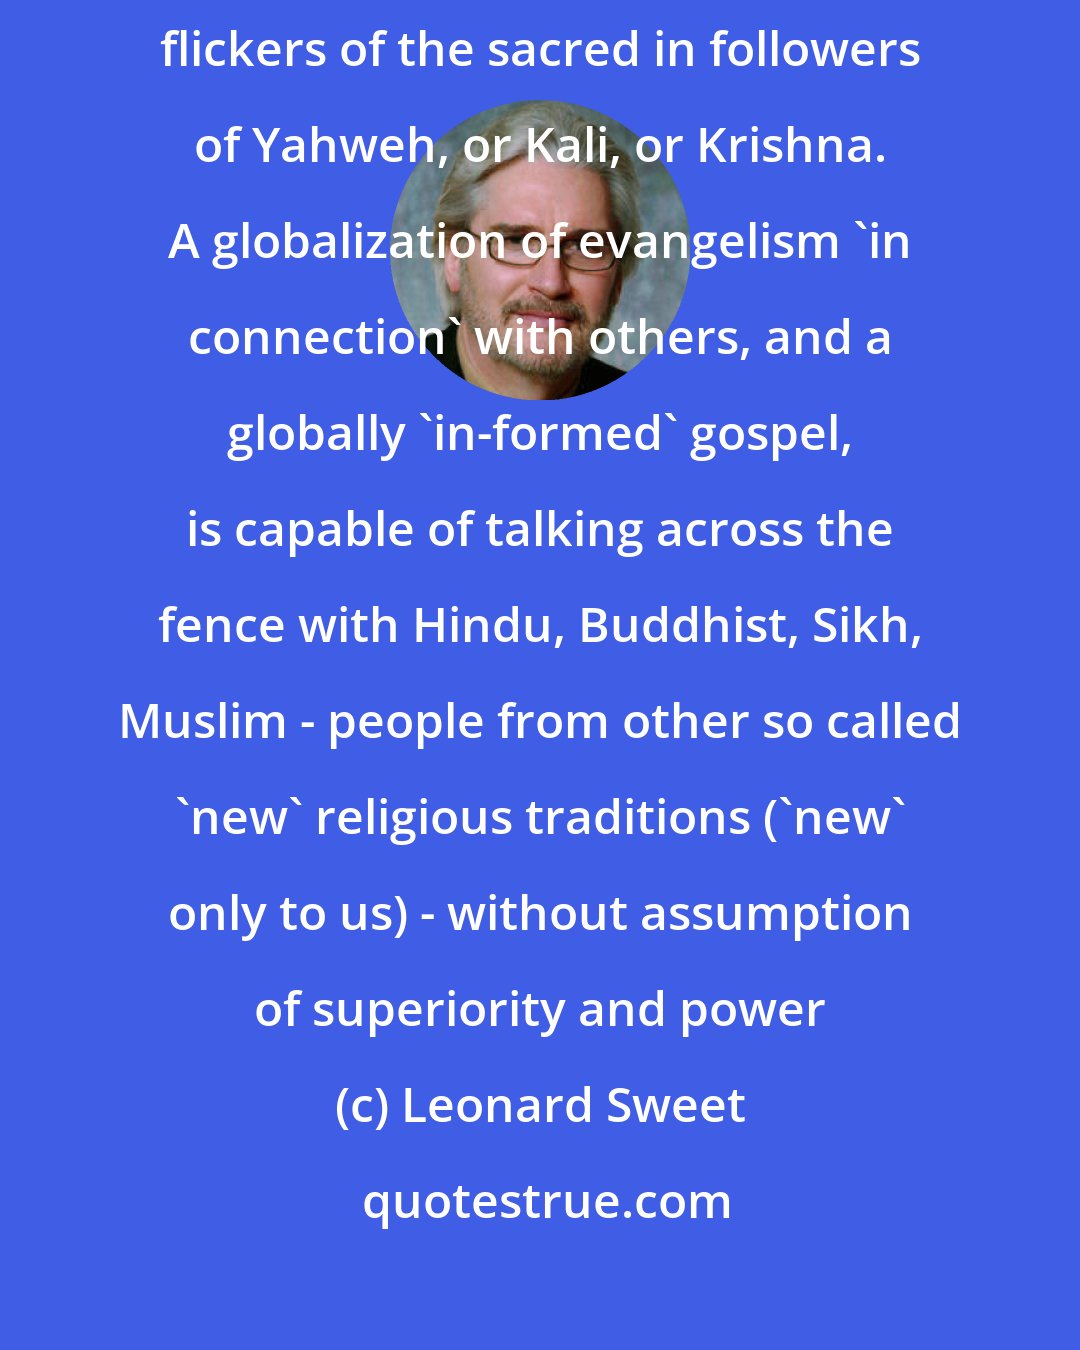 Leonard Sweet: One can be a faithful disciple of Jesus Christ without denying the flickers of the sacred in followers of Yahweh, or Kali, or Krishna. A globalization of evangelism 'in connection' with others, and a globally 'in-formed' gospel, is capable of talking across the fence with Hindu, Buddhist, Sikh, Muslim - people from other so called 'new' religious traditions ('new' only to us) - without assumption of superiority and power